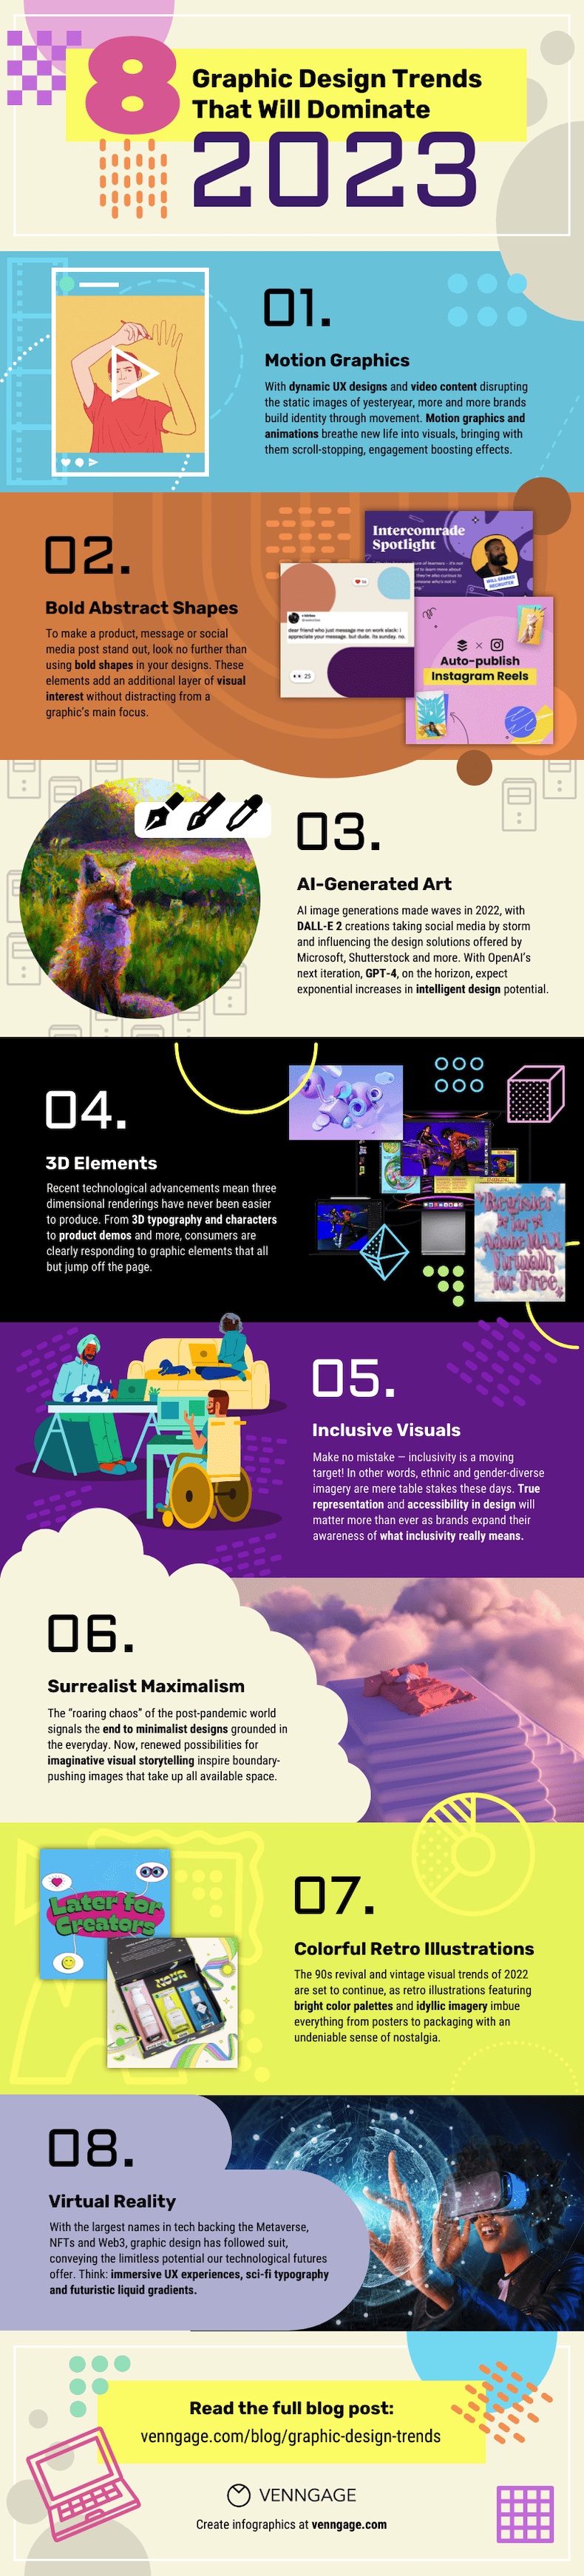 Graphic design trends that will dominate in 2023